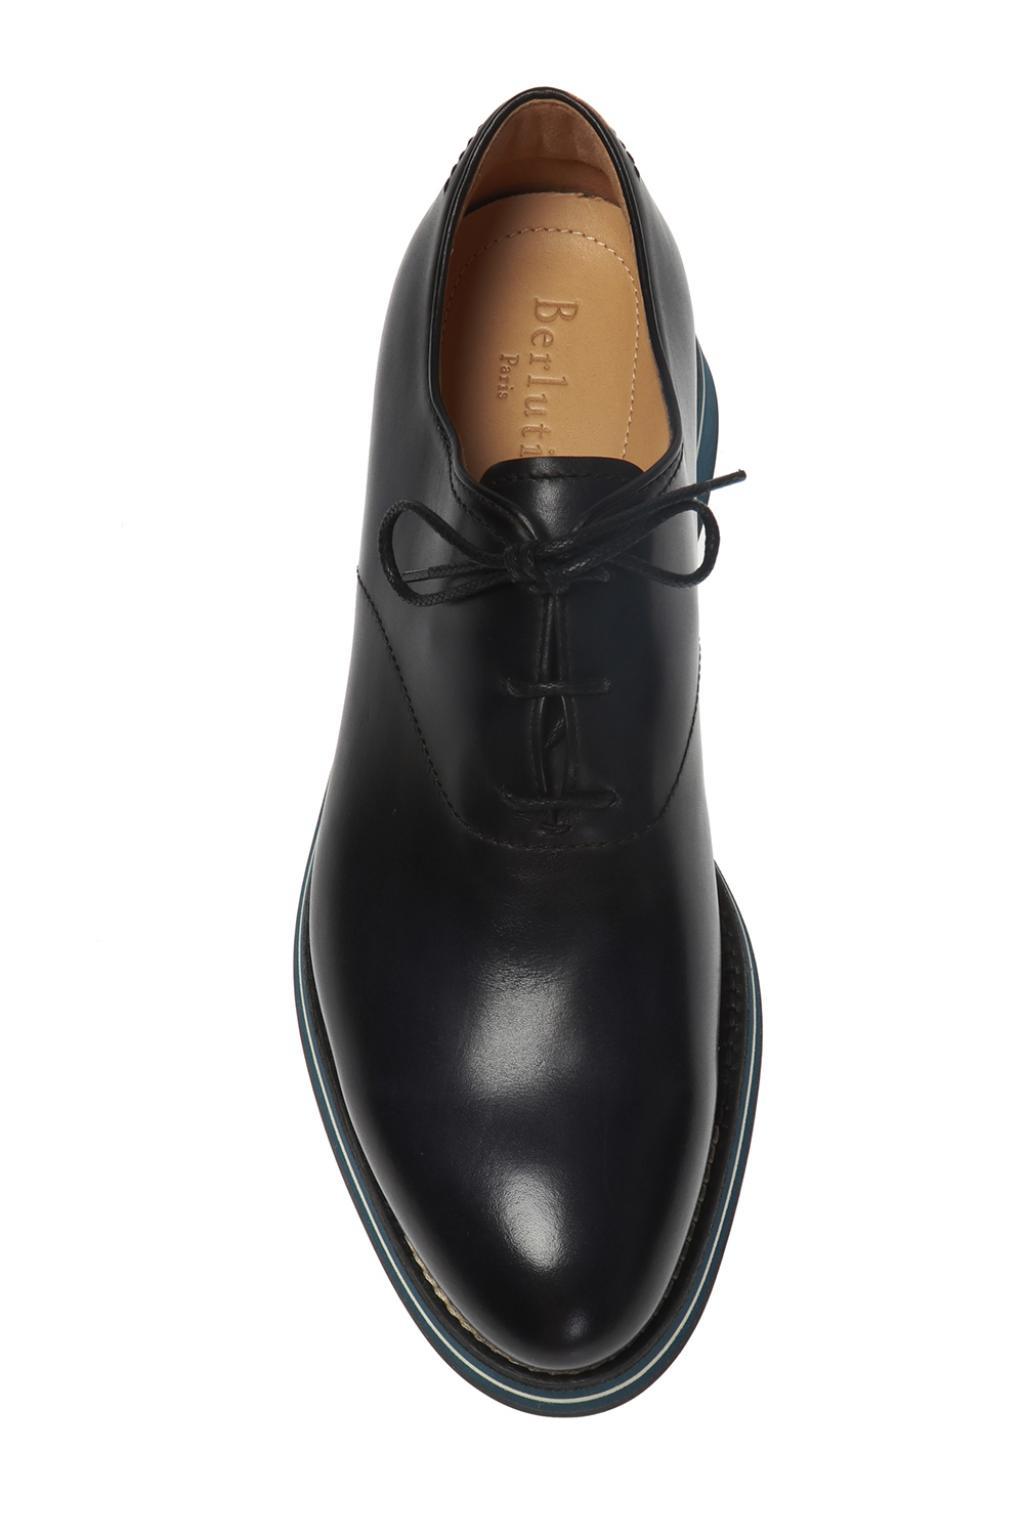 Berluti Leather 'padova' Oxford Shoes in Navy Blue (Blue) for Men - Lyst